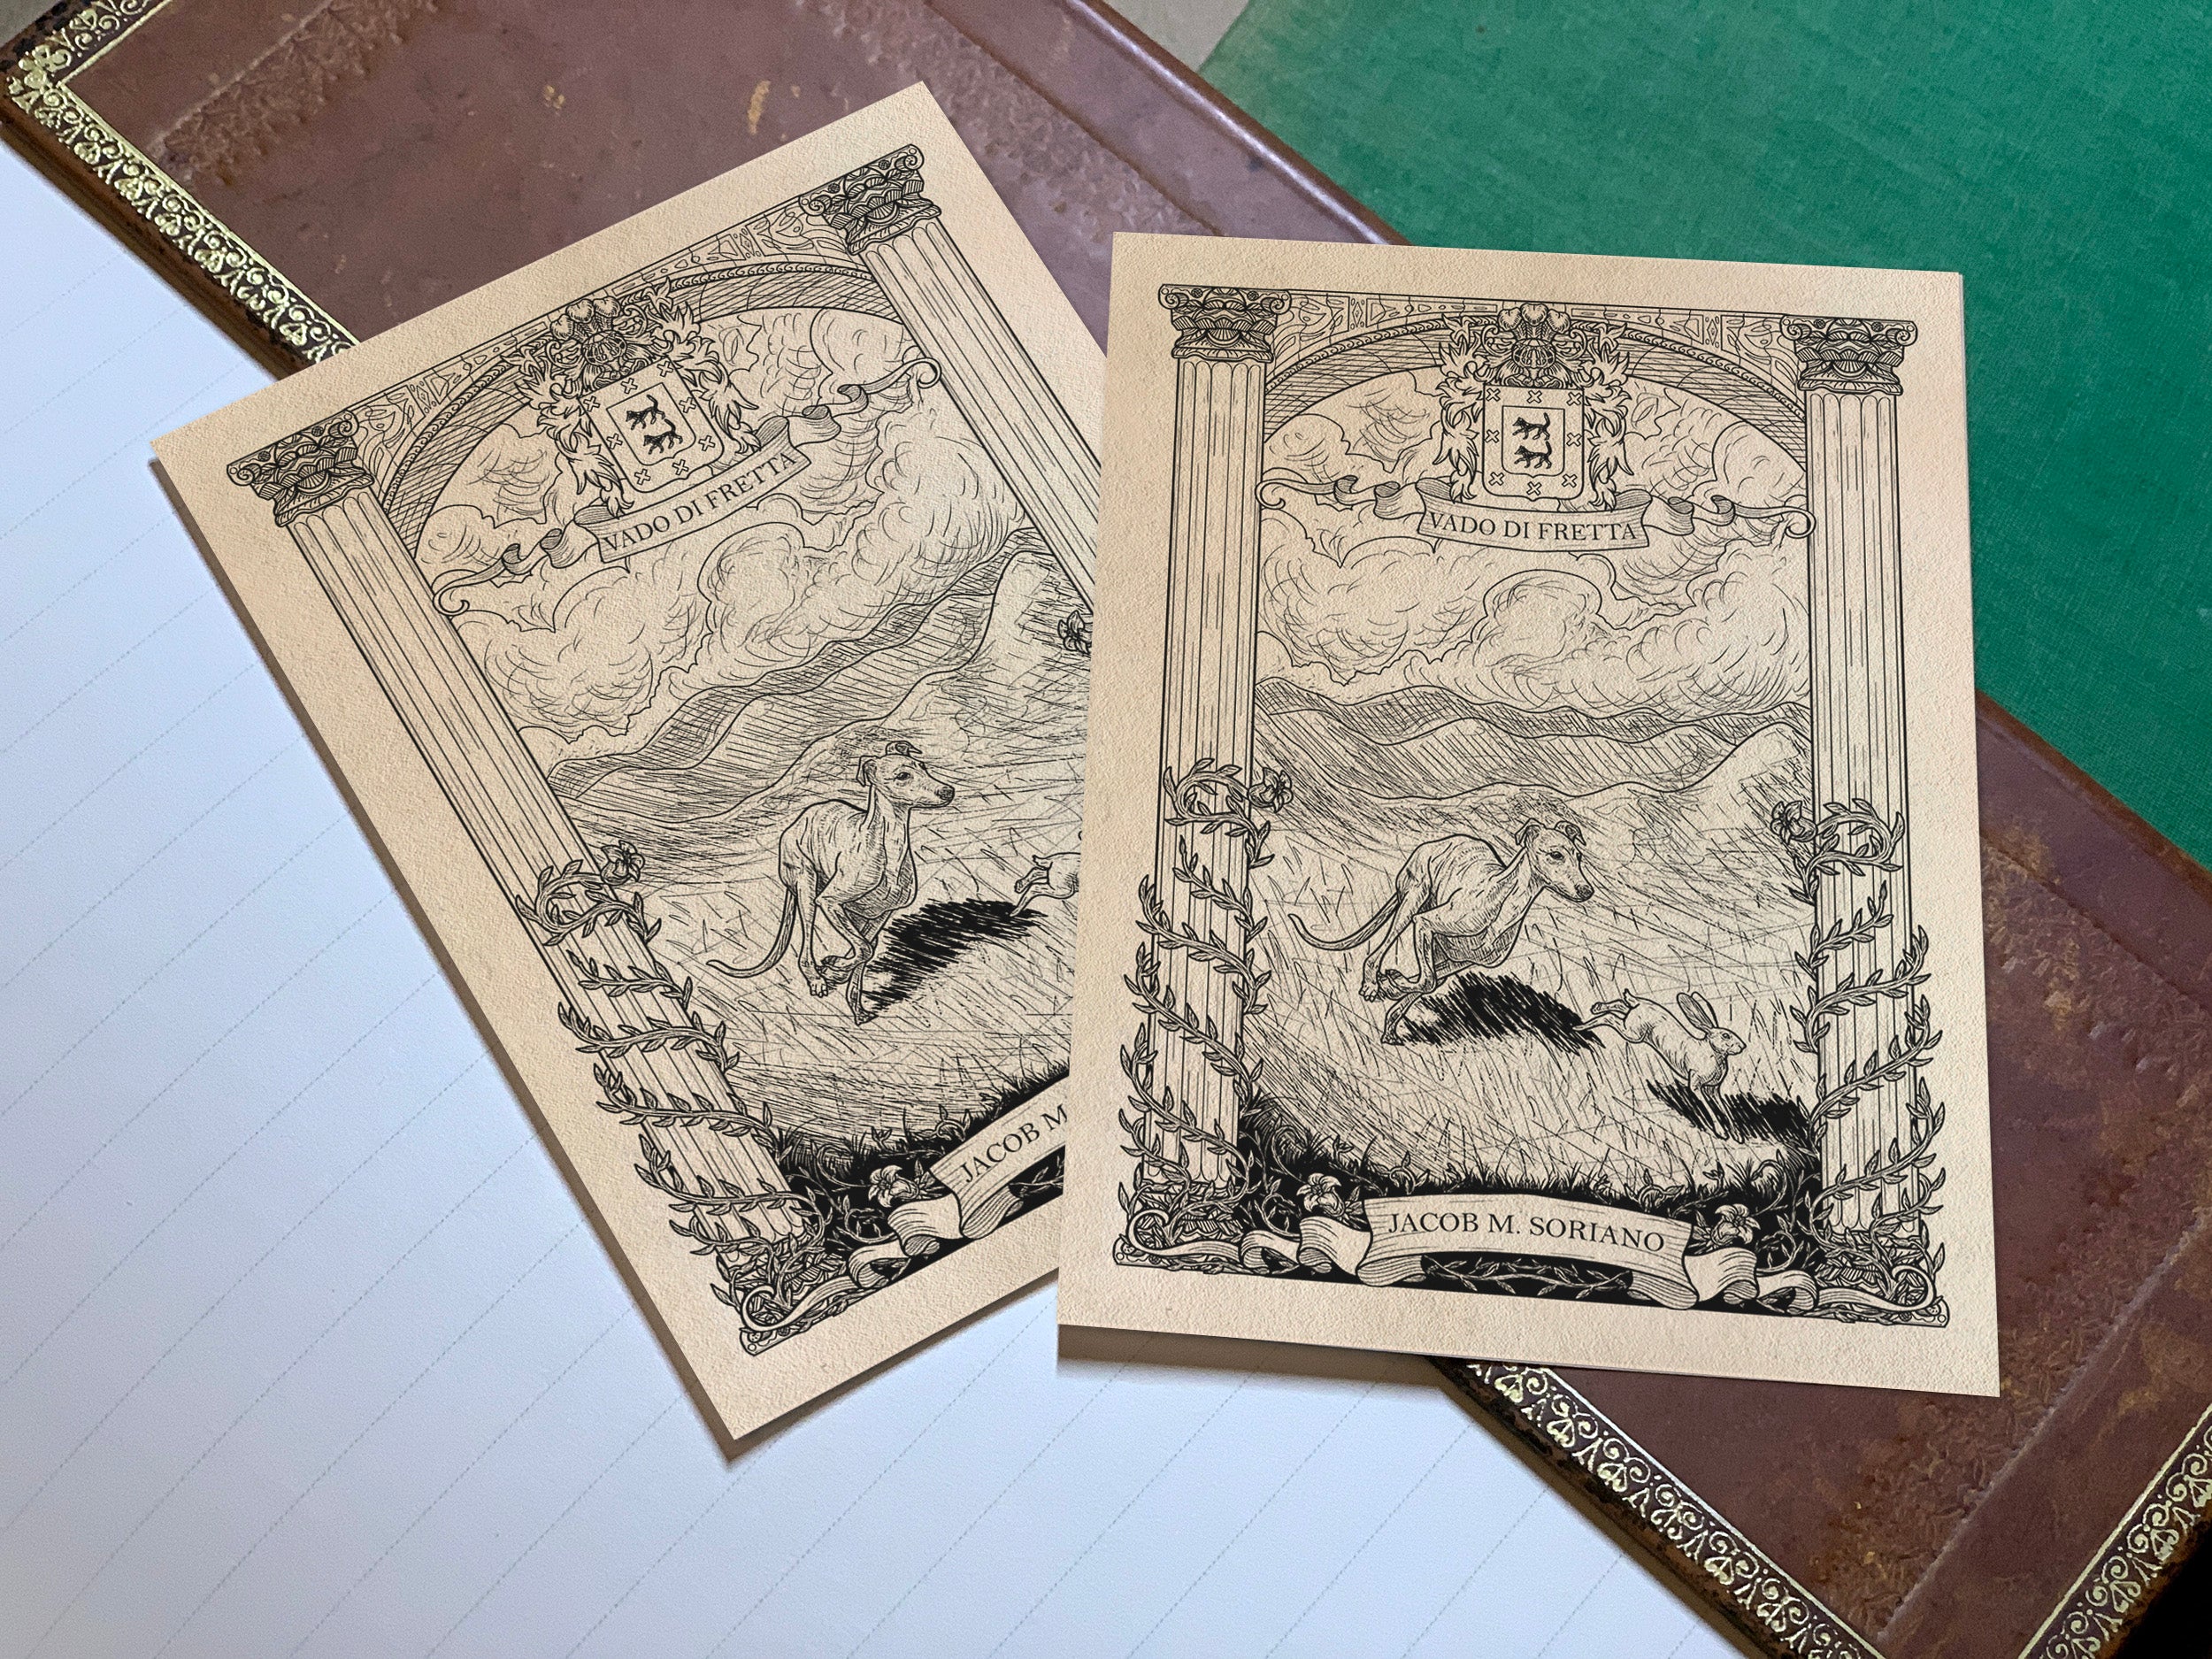 Soriano CUSTOM ORDER, Personalized Ex-Libris Bookplates, Crafted on Traditional Gummed Paper, 4in x 3in, 150 Pieces